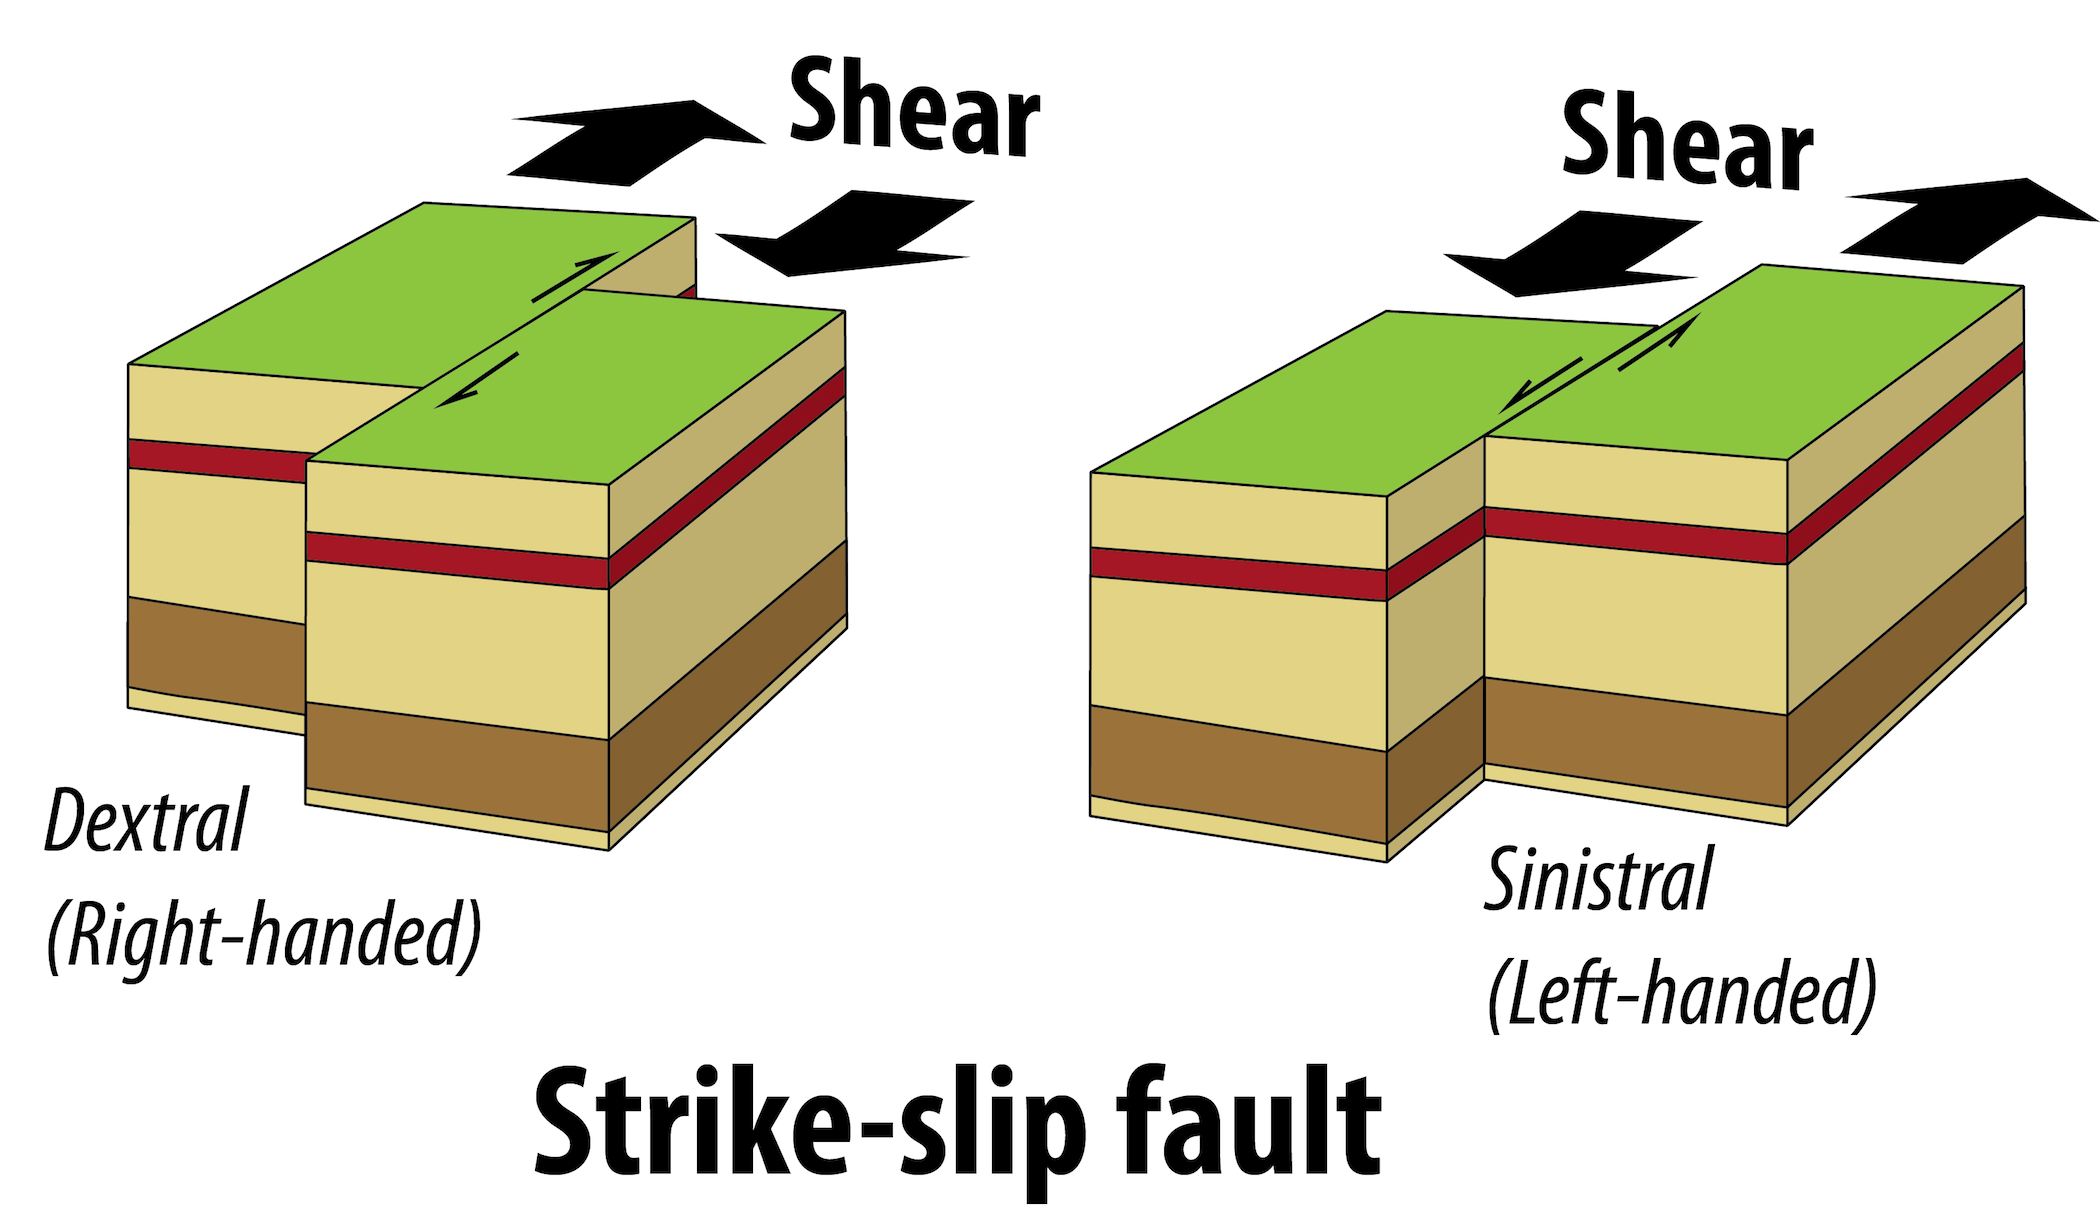 a left lateral strike slip fault results in a